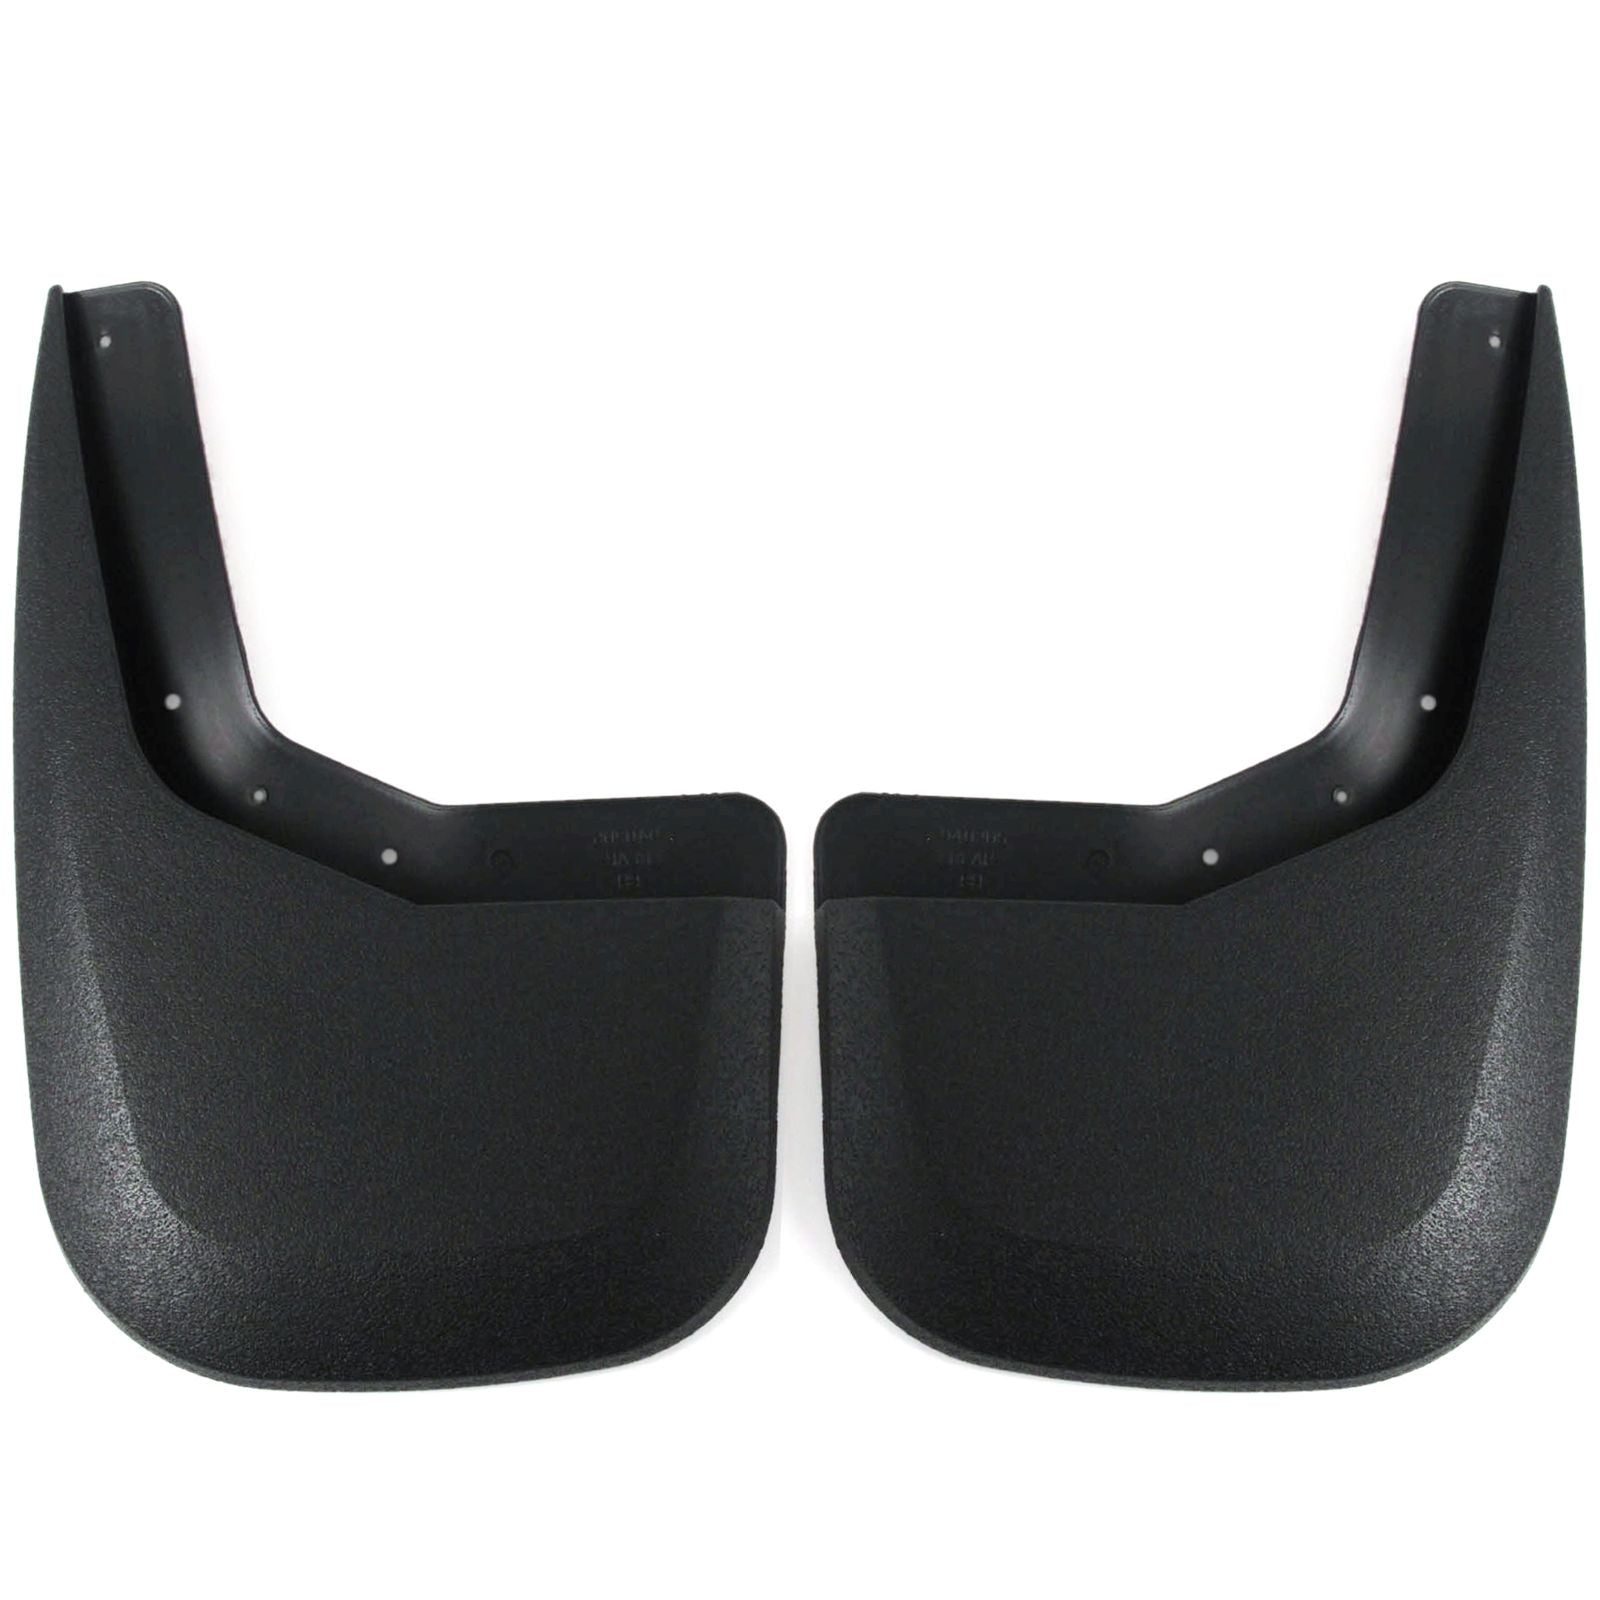 2007-2013 Compatible with Sierra 1500 Mud Flaps Guards Splash Rear Molded 2pc Set - Check Description for Specific Applications